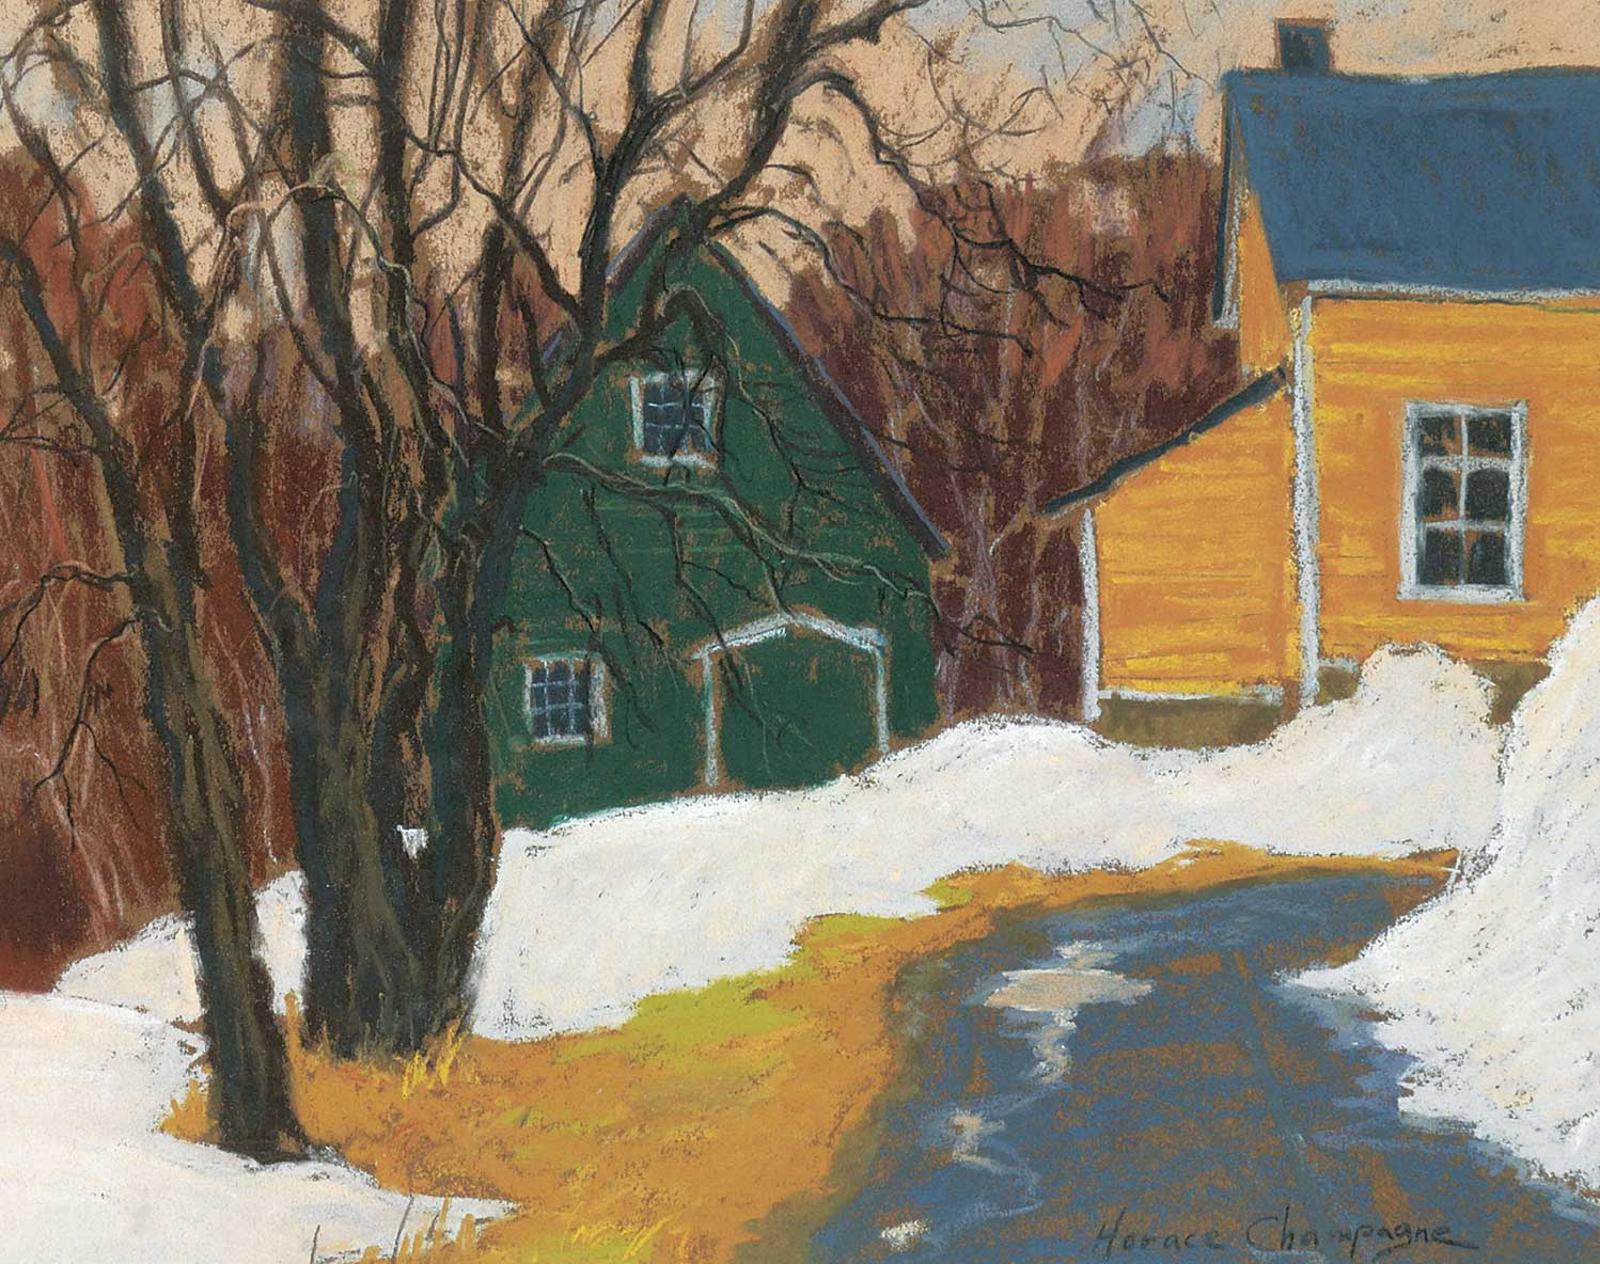 Horace Champagne (1937) - The Green Garage at St. Petron, Ile D'Orlean, Quebec